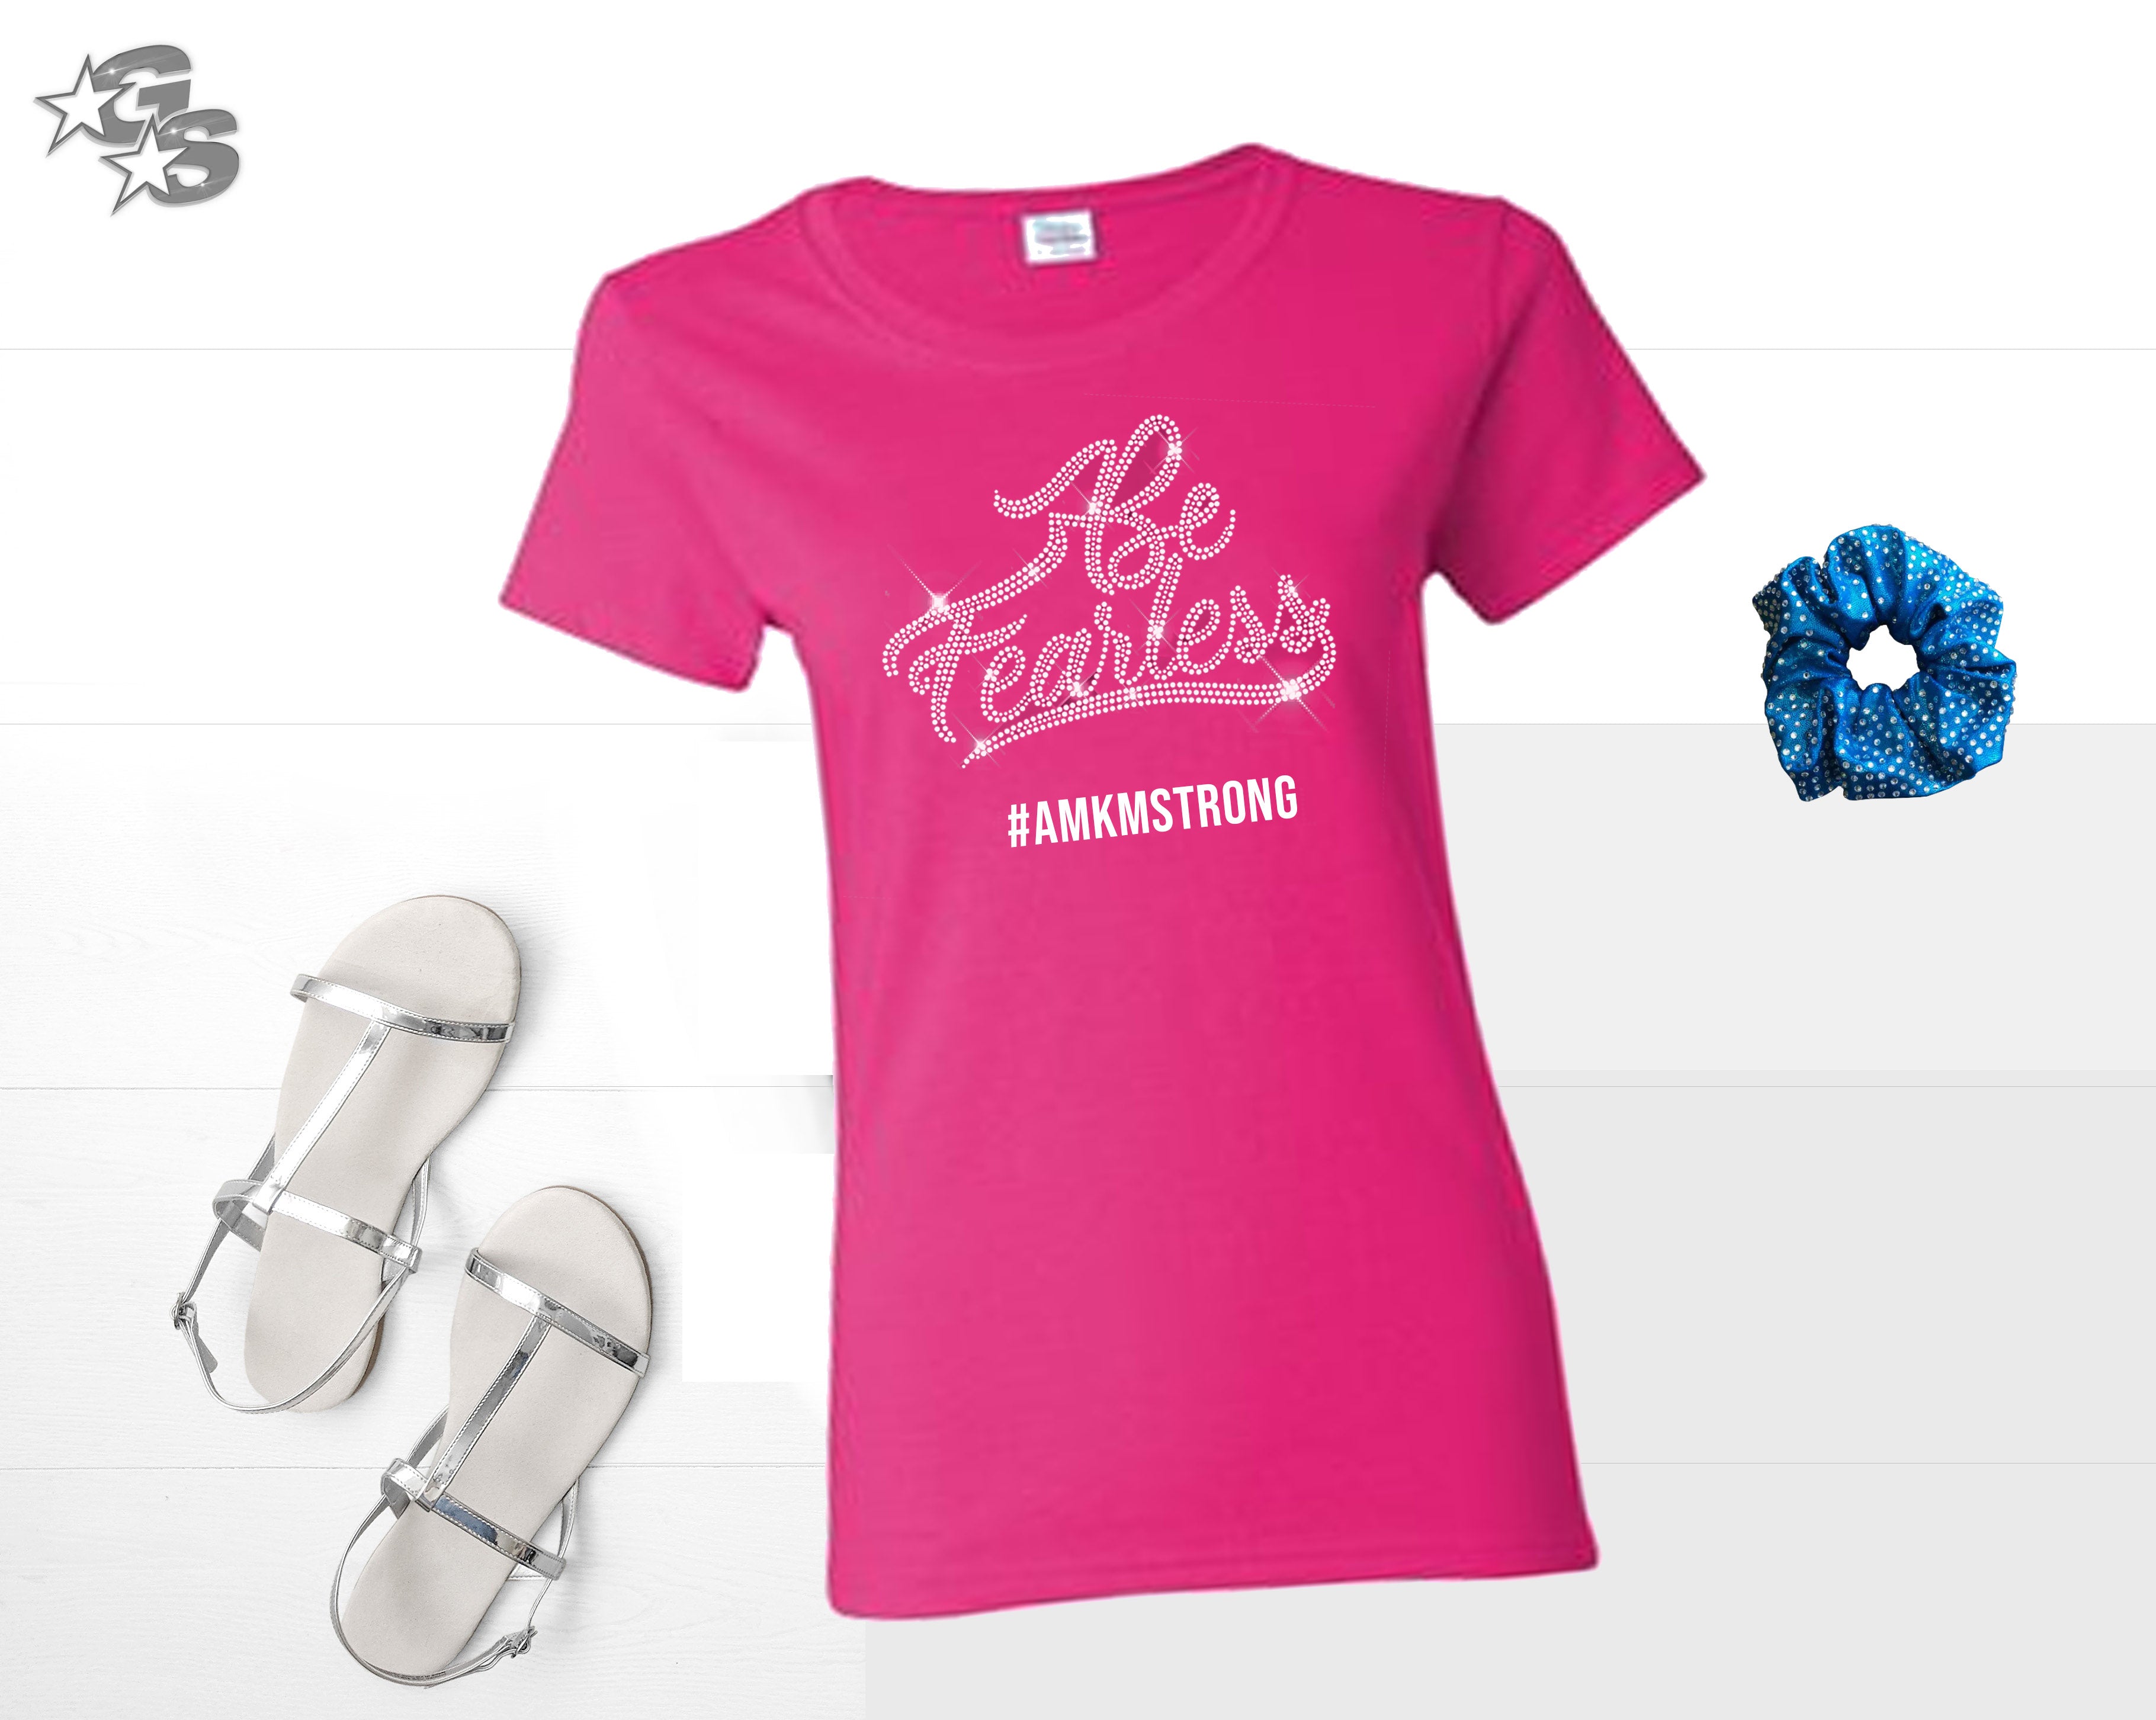 Be Fearless Fitted Tee - Pink (Bling) - for AMKM - Custom hashtag option  - Youth